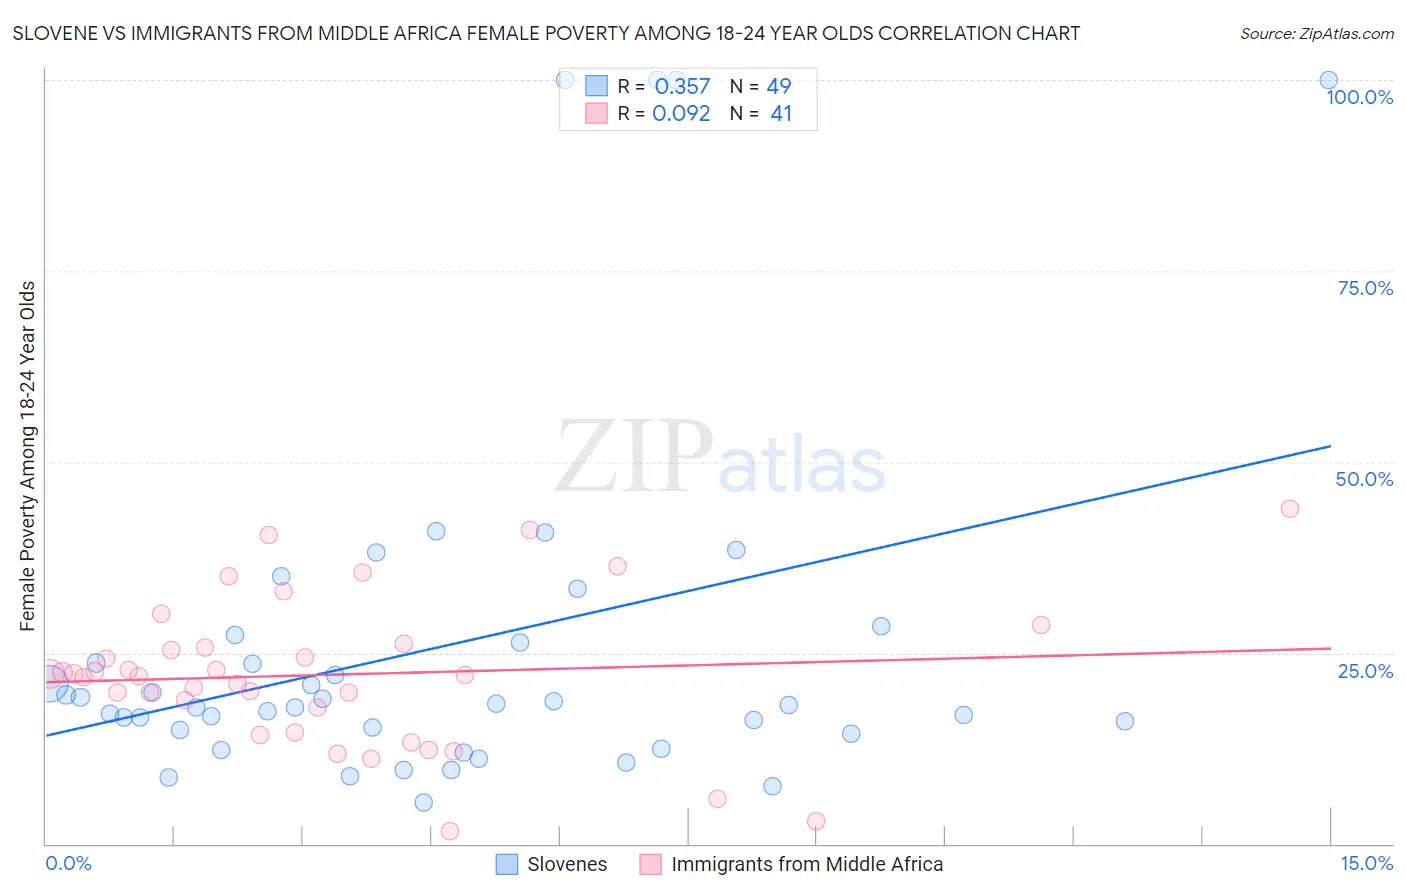 Slovene vs Immigrants from Middle Africa Female Poverty Among 18-24 Year Olds